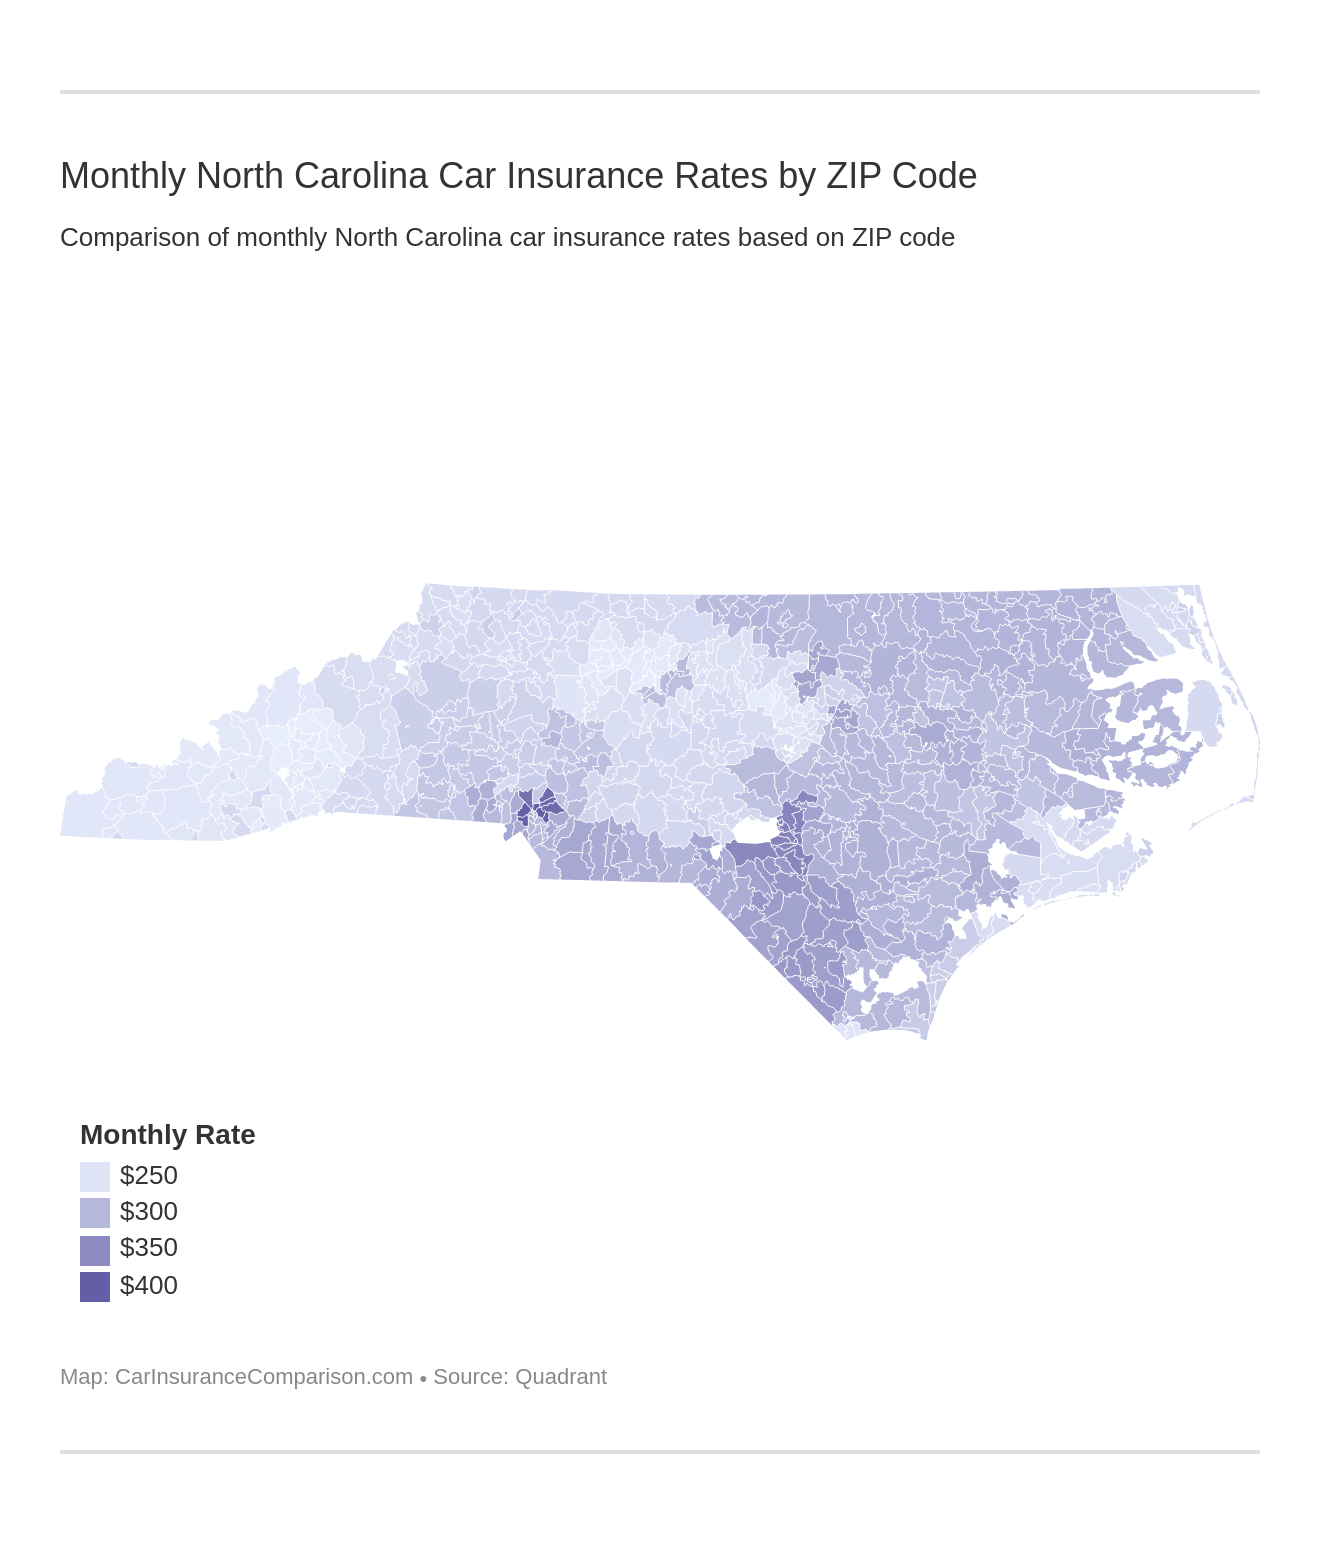 Monthly North Carolina Car Insurance Rates by ZIP Code